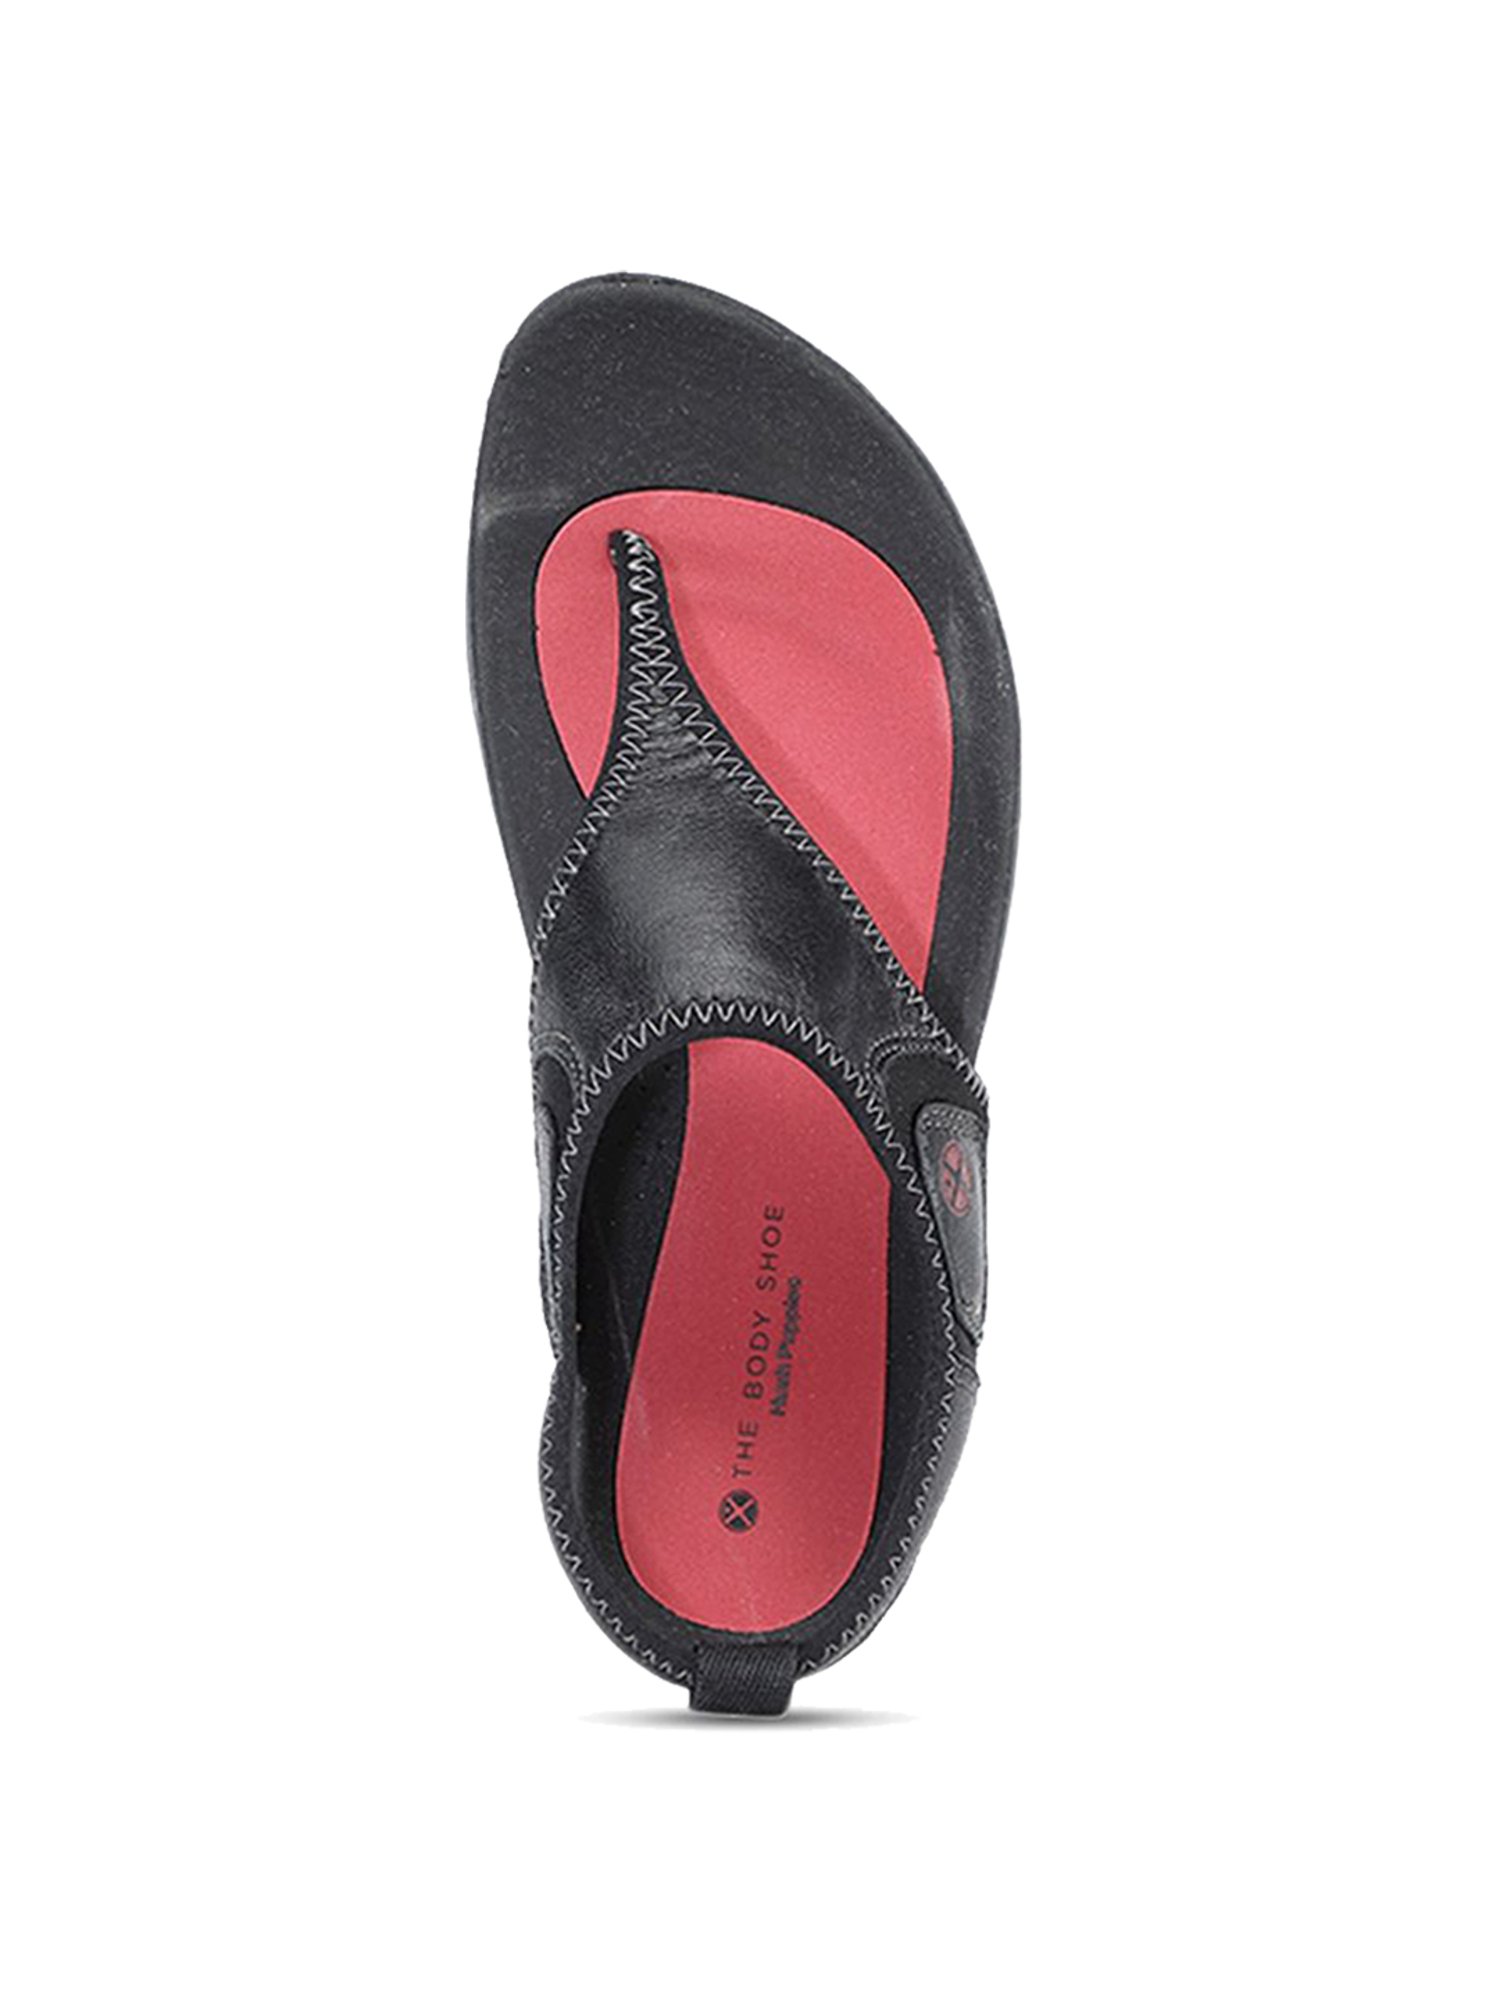 Buy Hush Puppies Sandals For Men ( Black ) Online at Low Prices in India -  Paytmmall.com